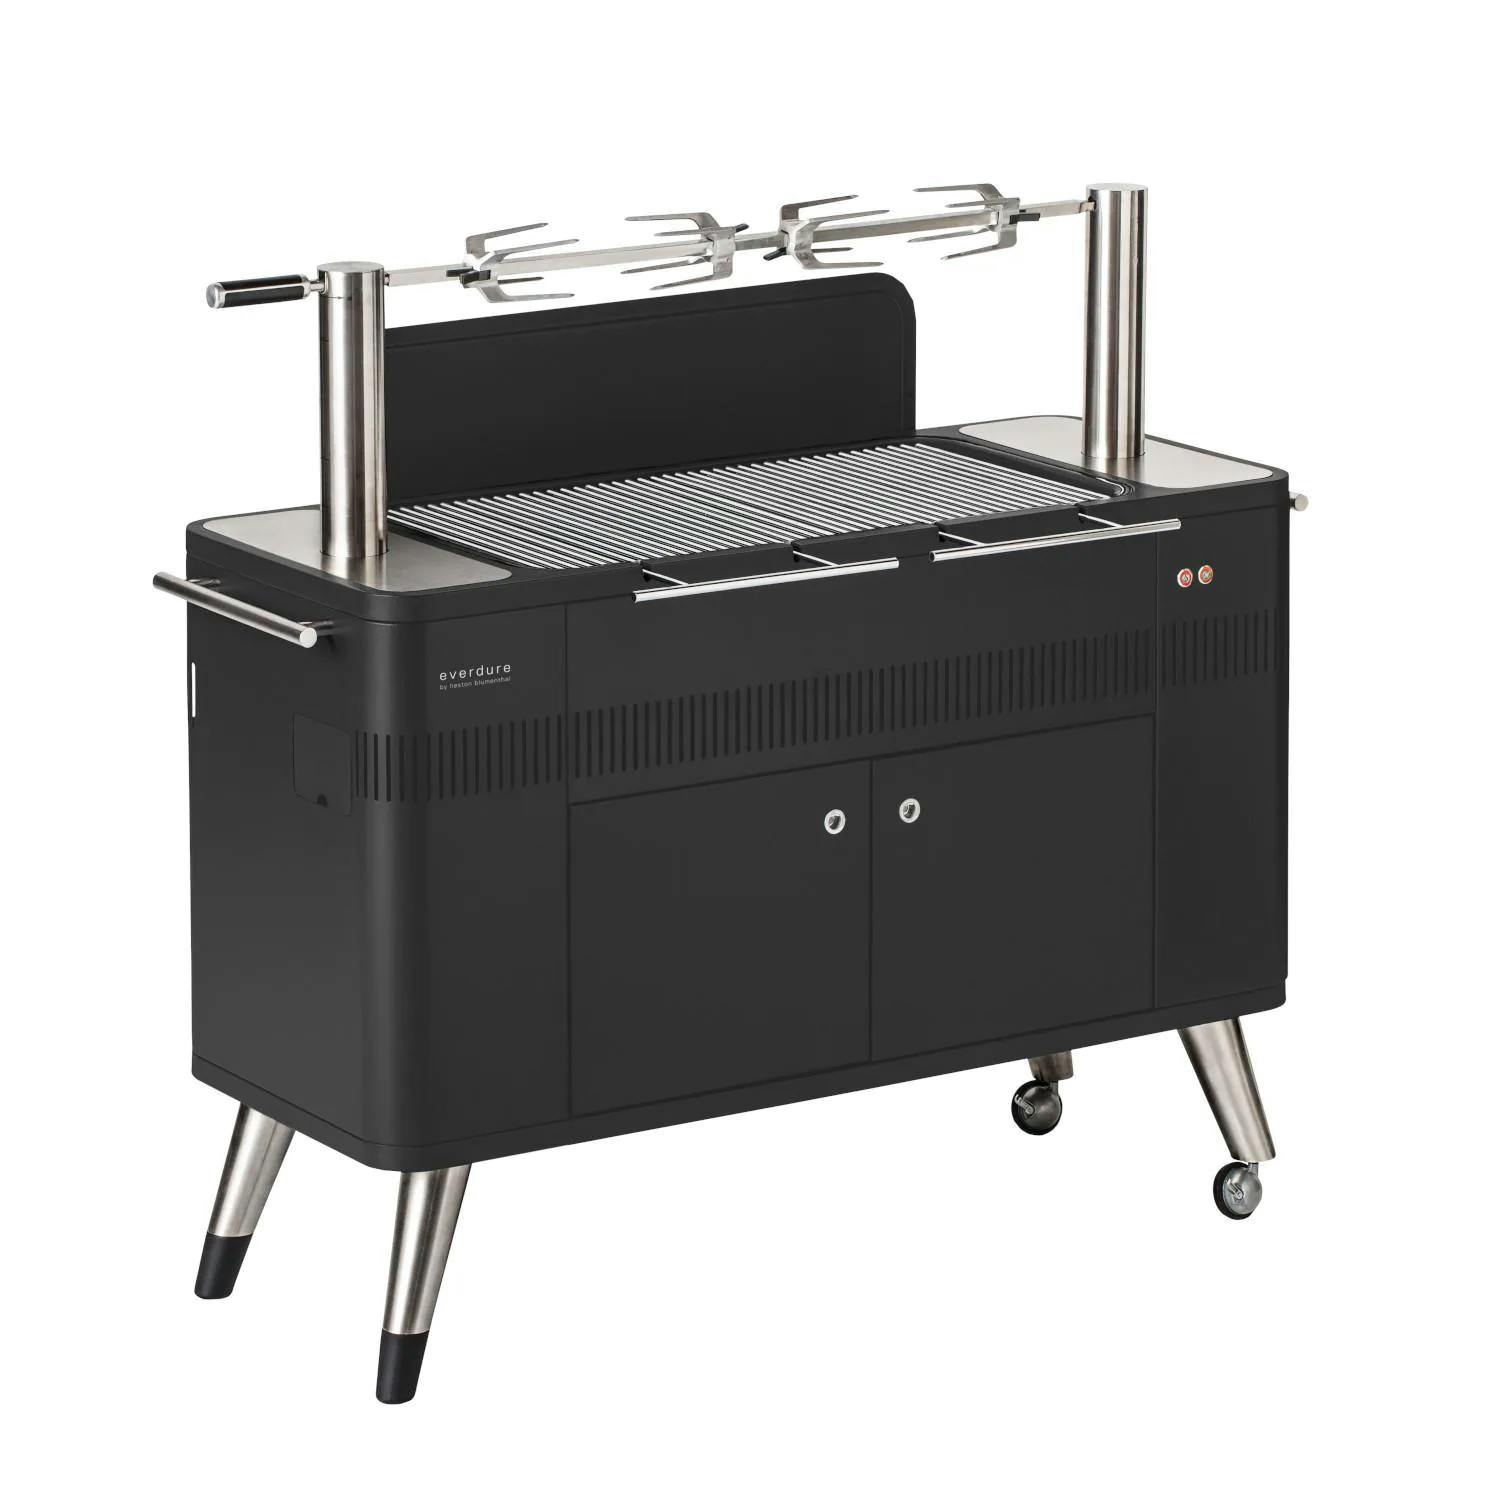 Everdure By Heston Blumenthal HUB I Charcoal Grill with Rotisserie & Electronic Ignition · 54 in.